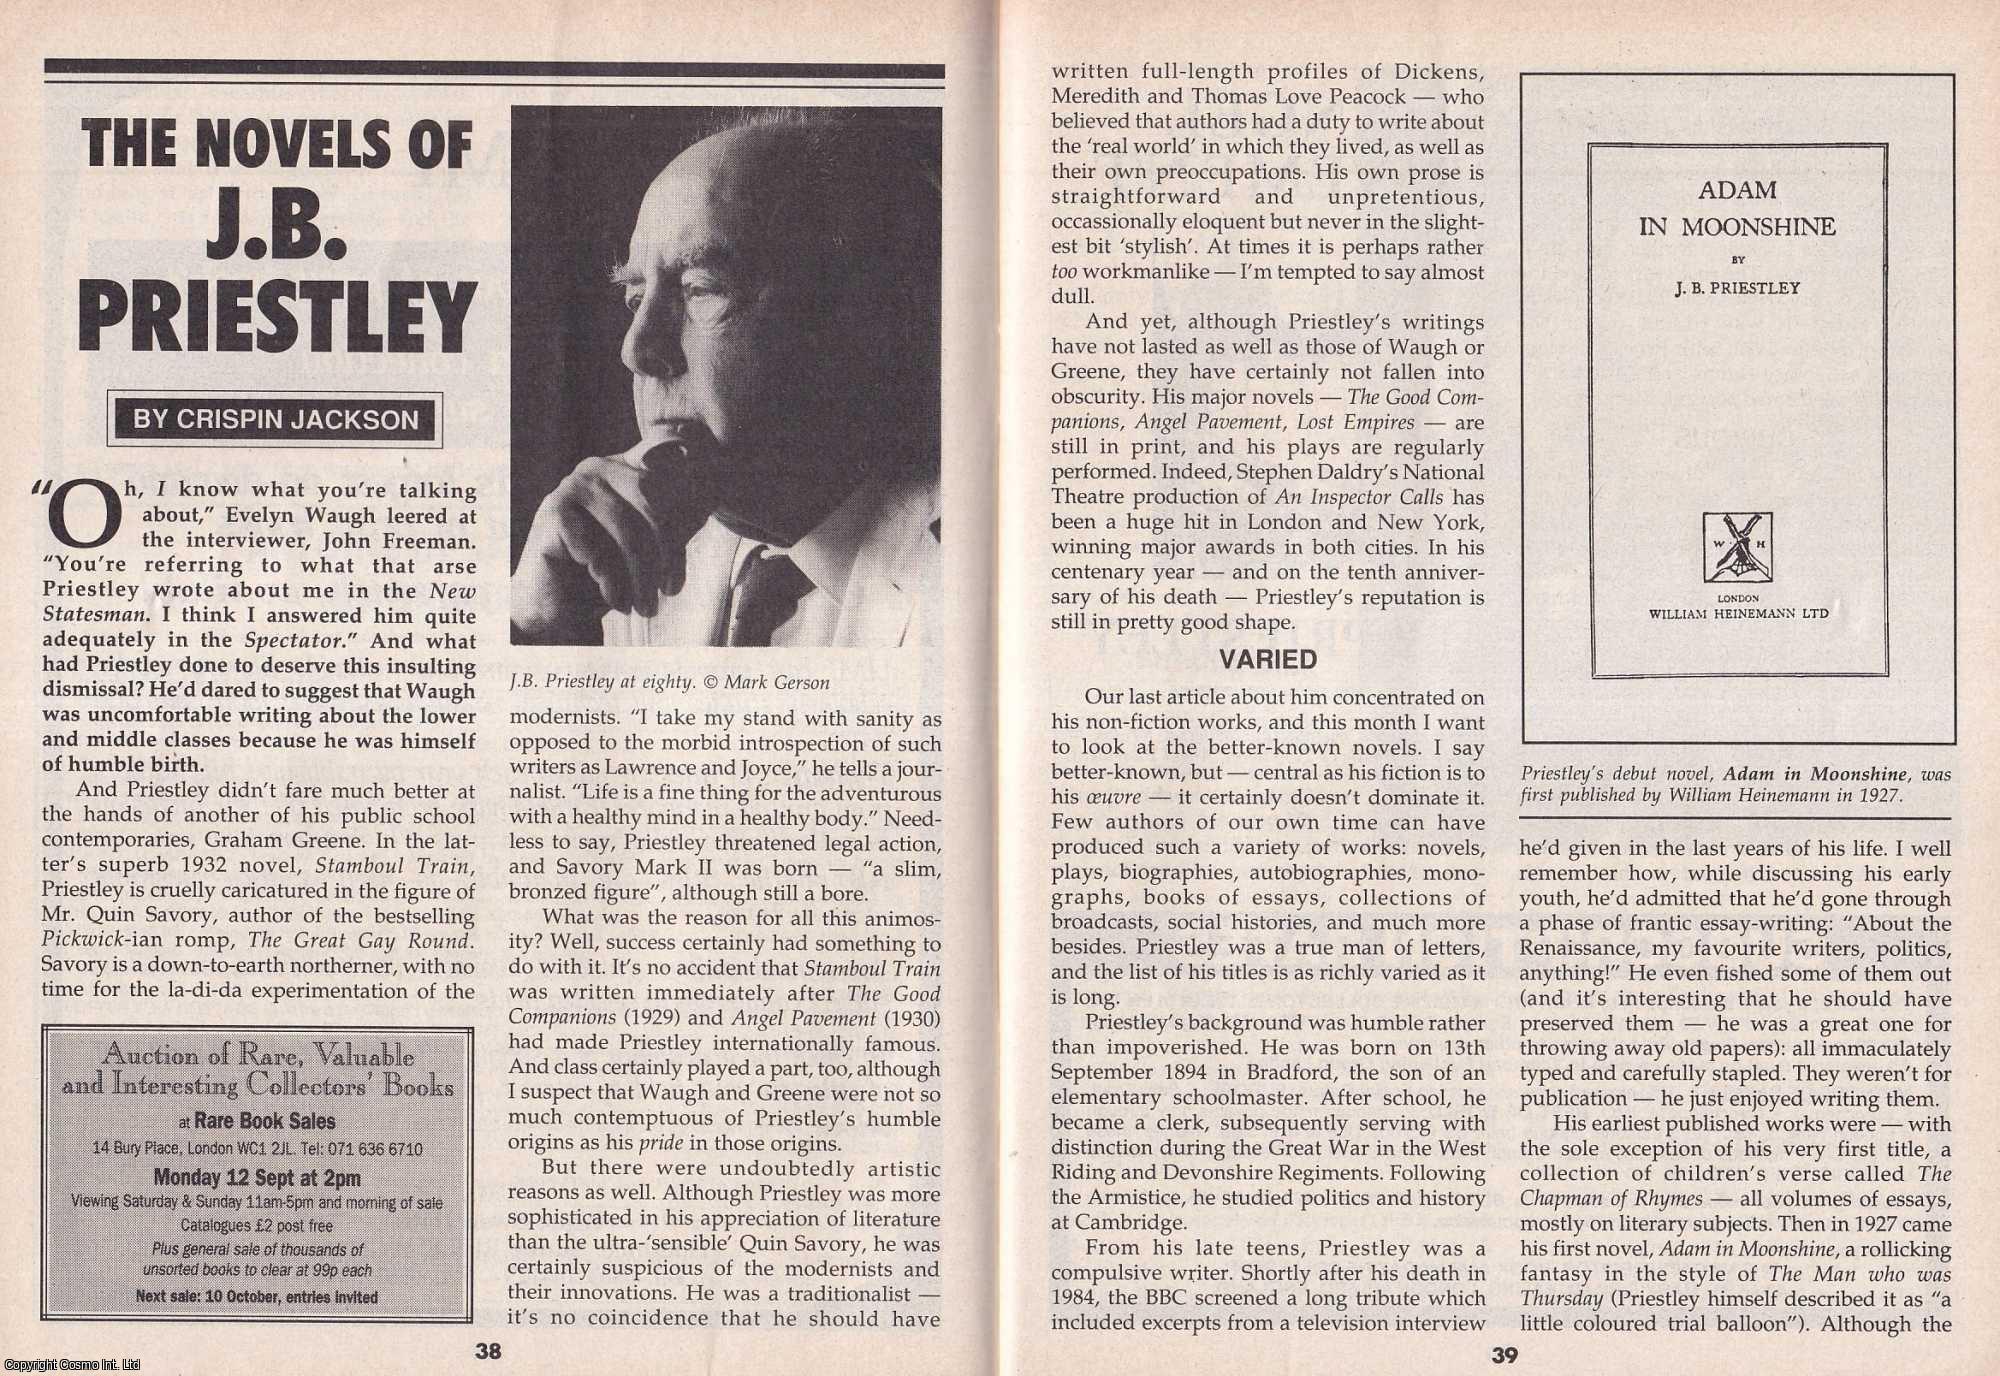 Crispin Jackson - The Novels of J. B. Priestley. This is an original article separated from an issue of The Book & Magazine Collector publication.